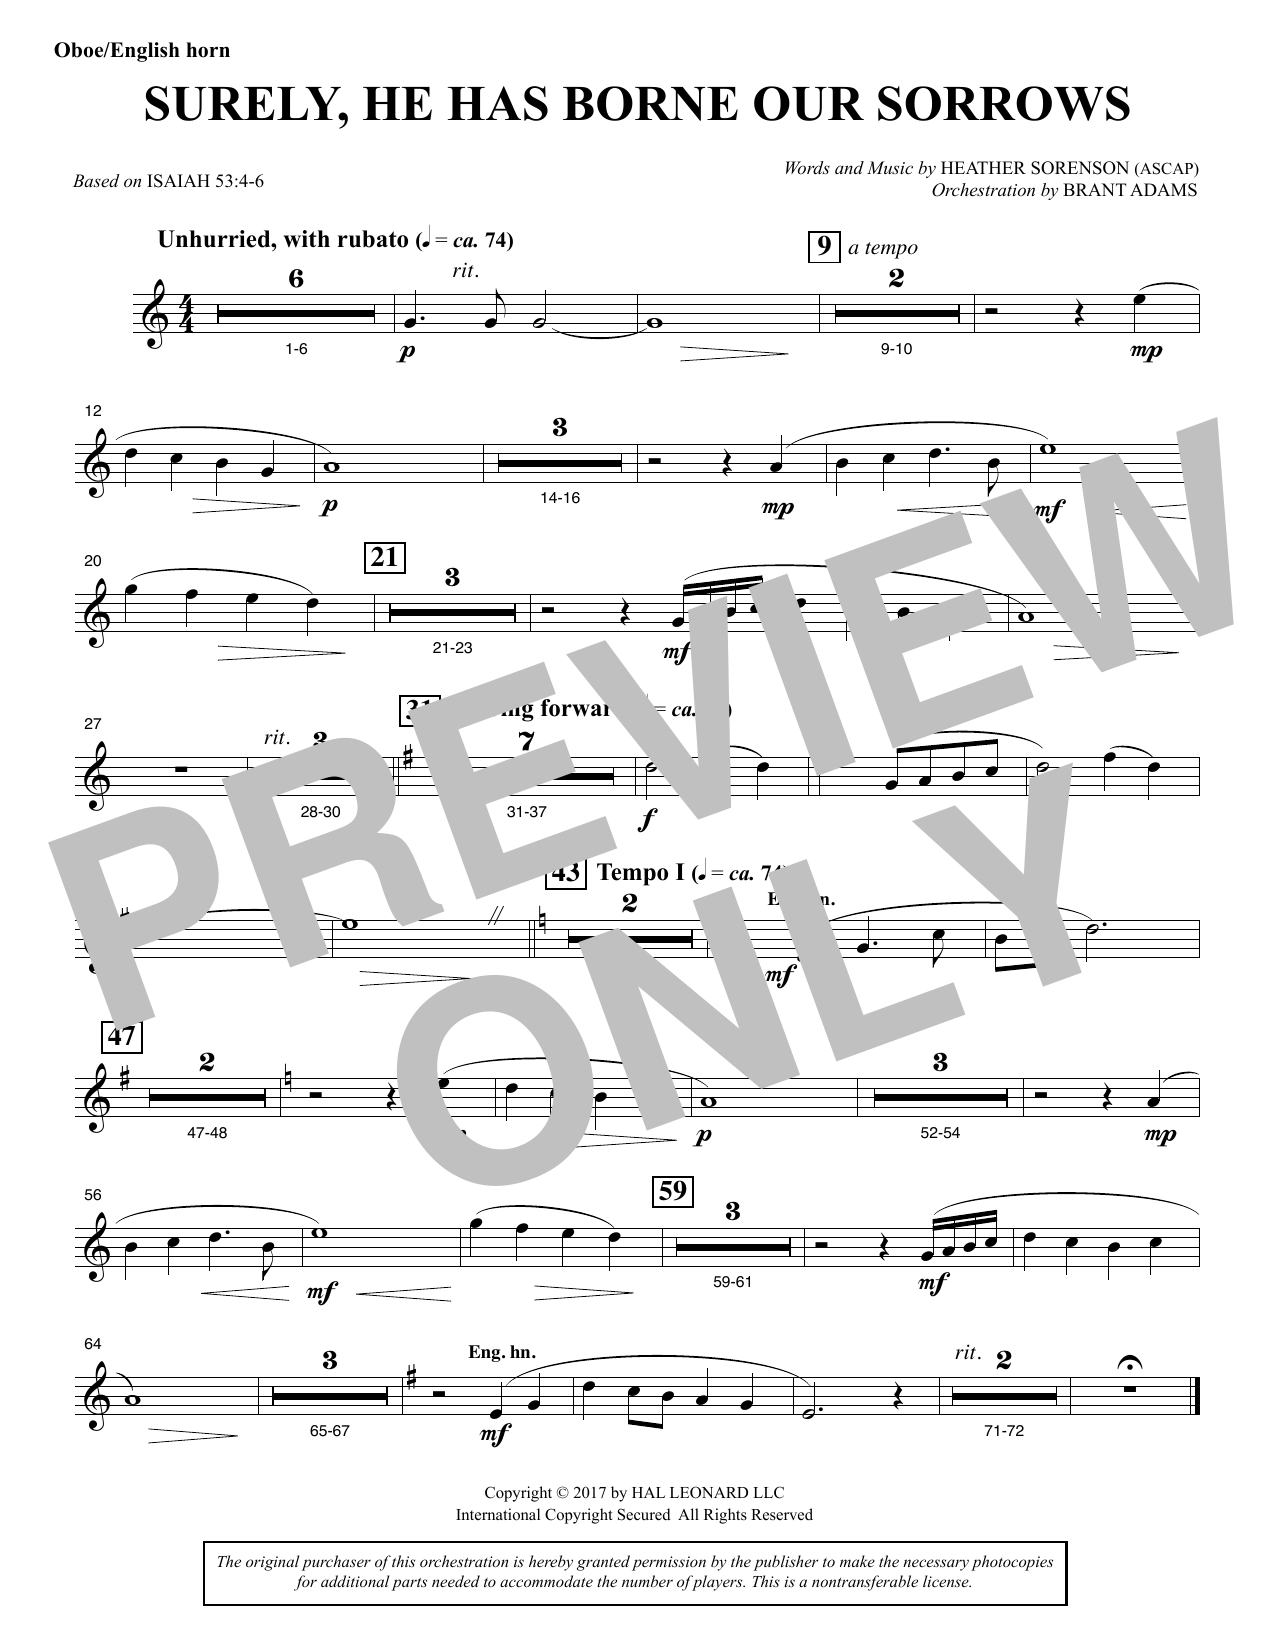 Download Heather Sorenson Surely, He Has Borne Our Sorrows - Oboe Sheet Music